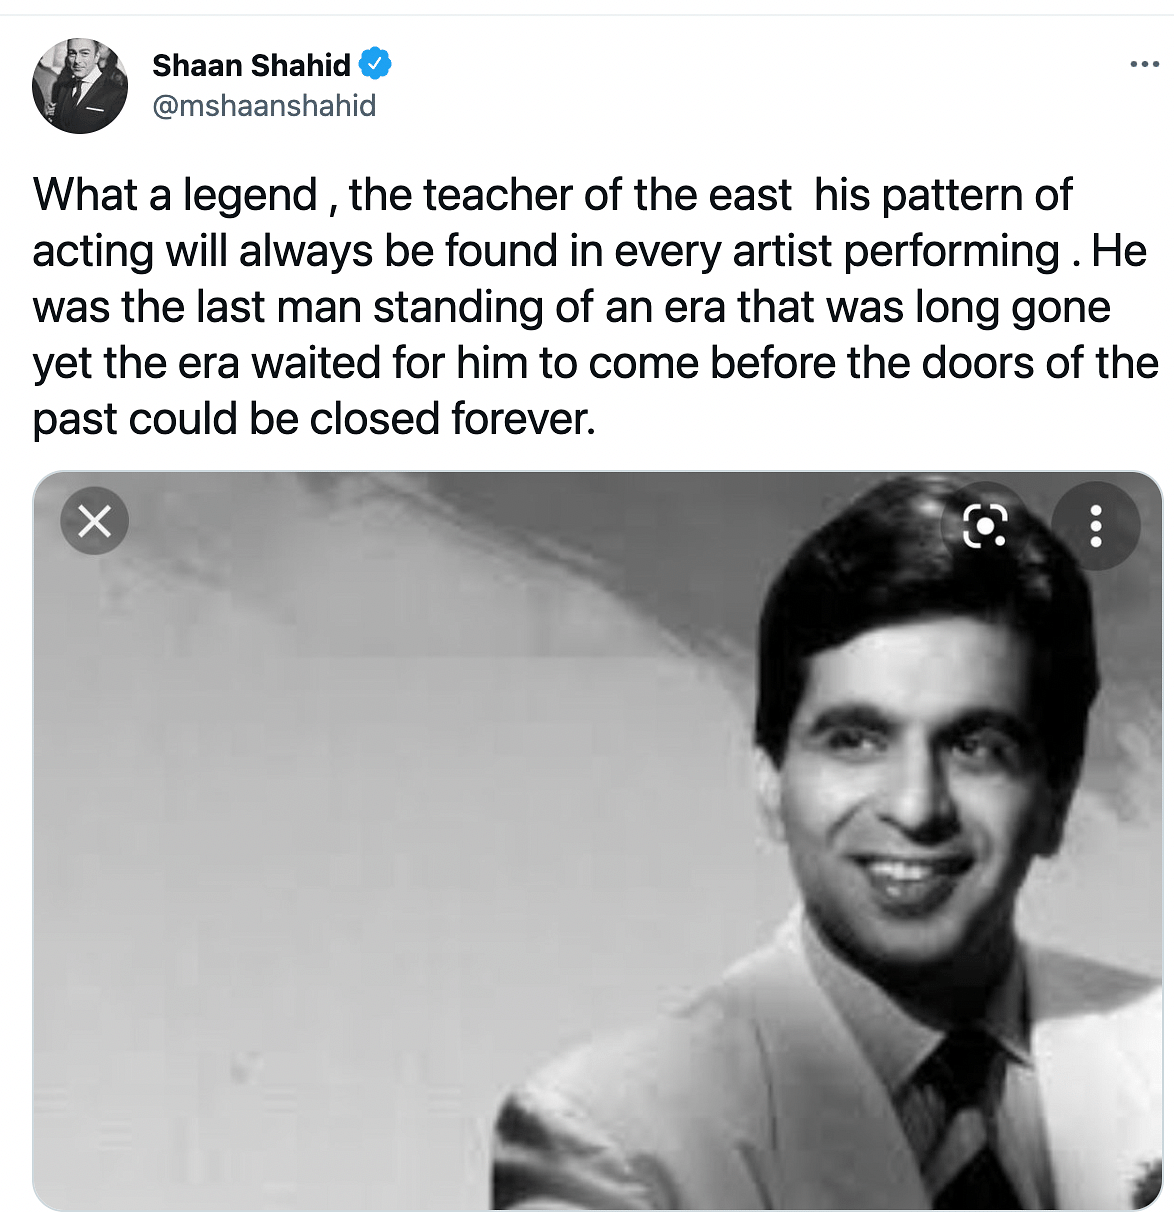 "A purist par excellence", wrote Ali Zafar in his tribute to Dilip Kumar. 